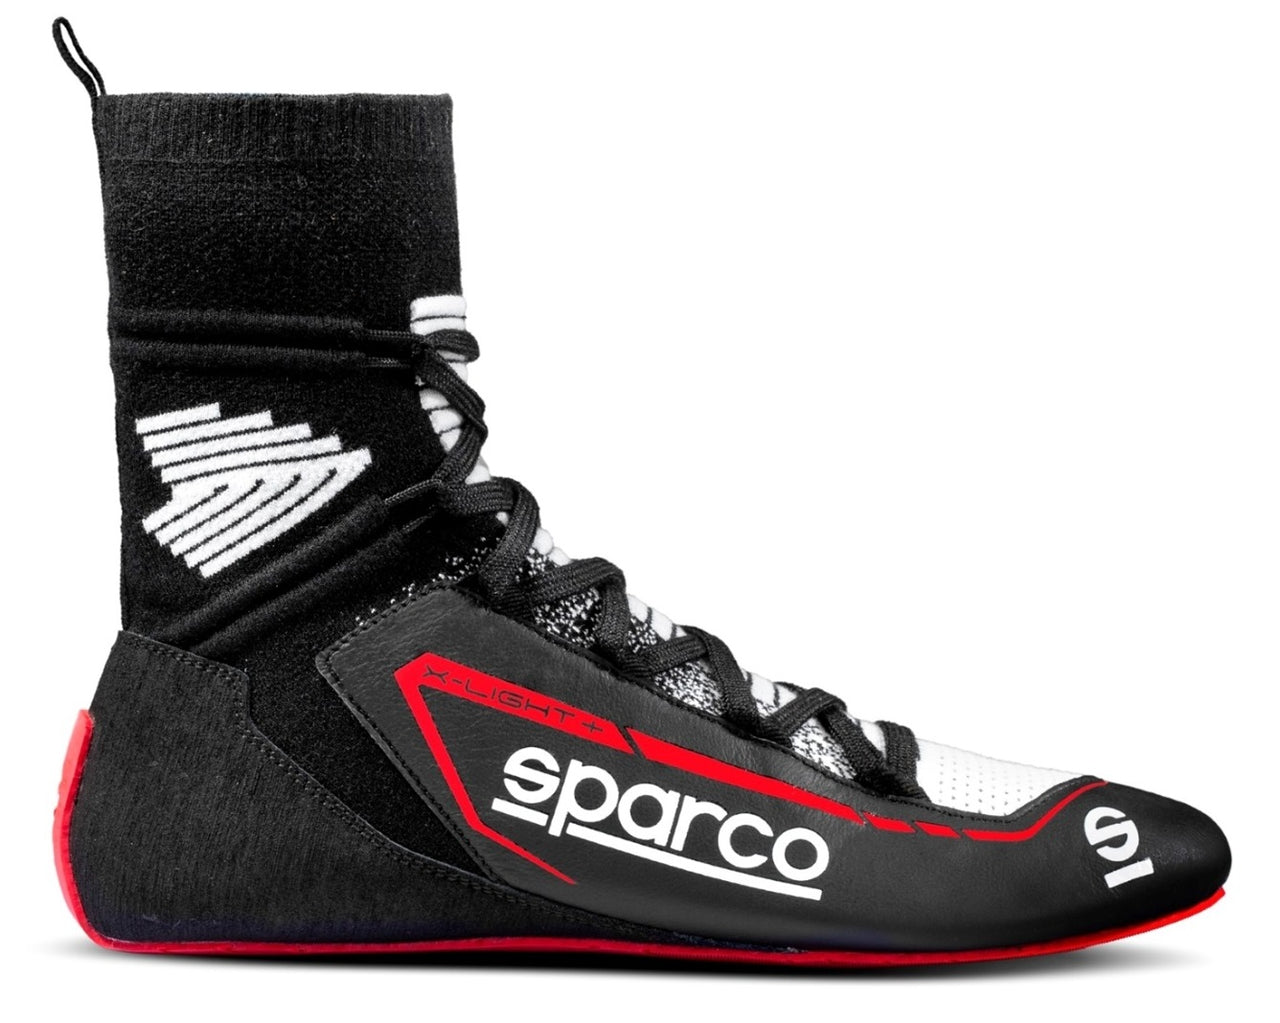 Sparco X-Light+ Racing Shoes Black / Red Image